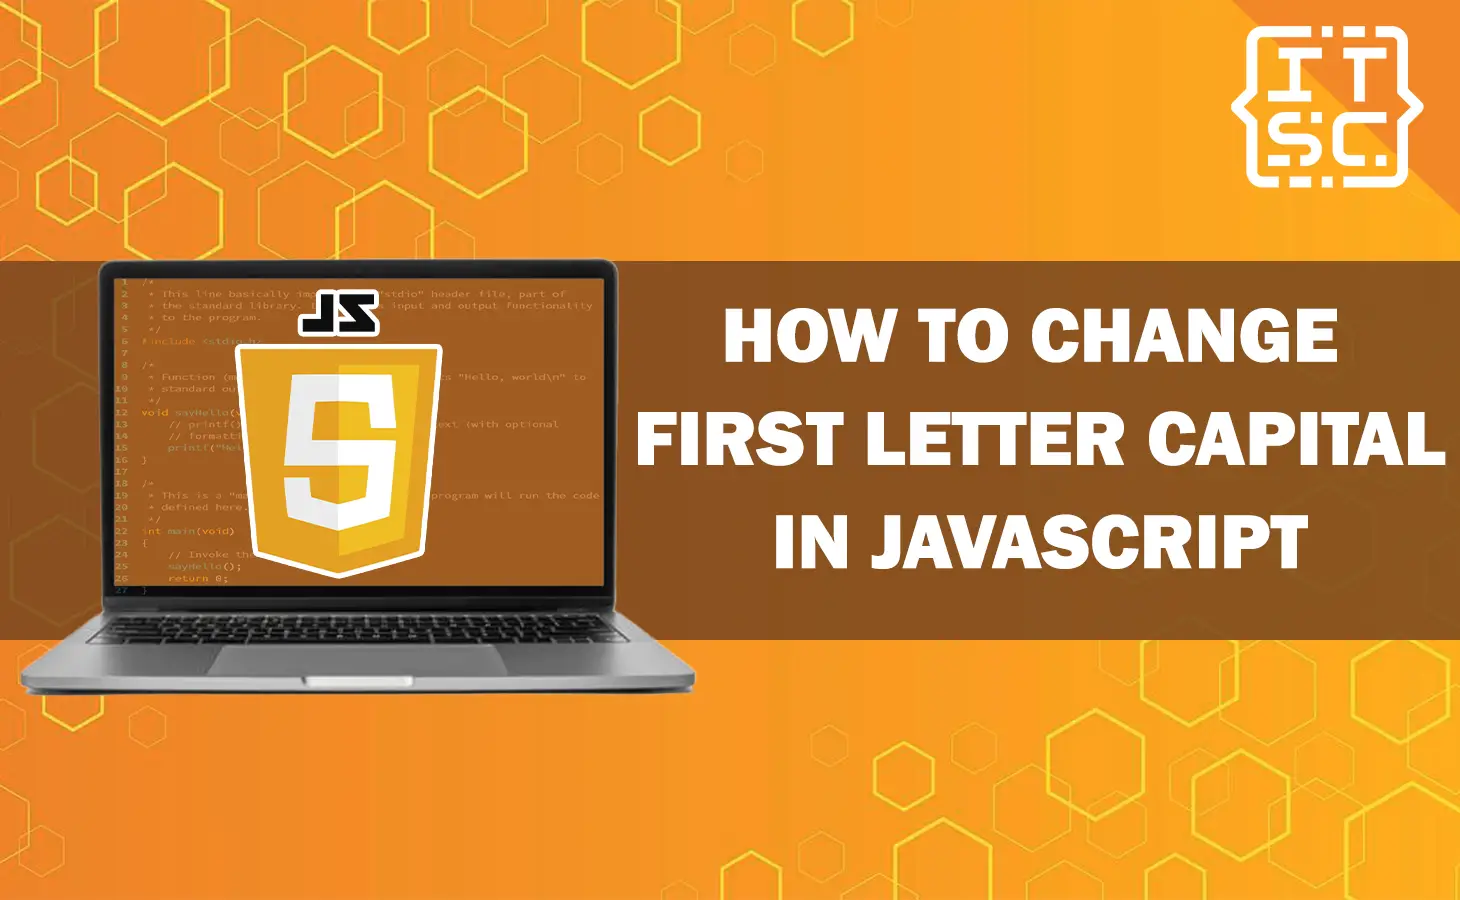 How to change first letter capital in JavaScript